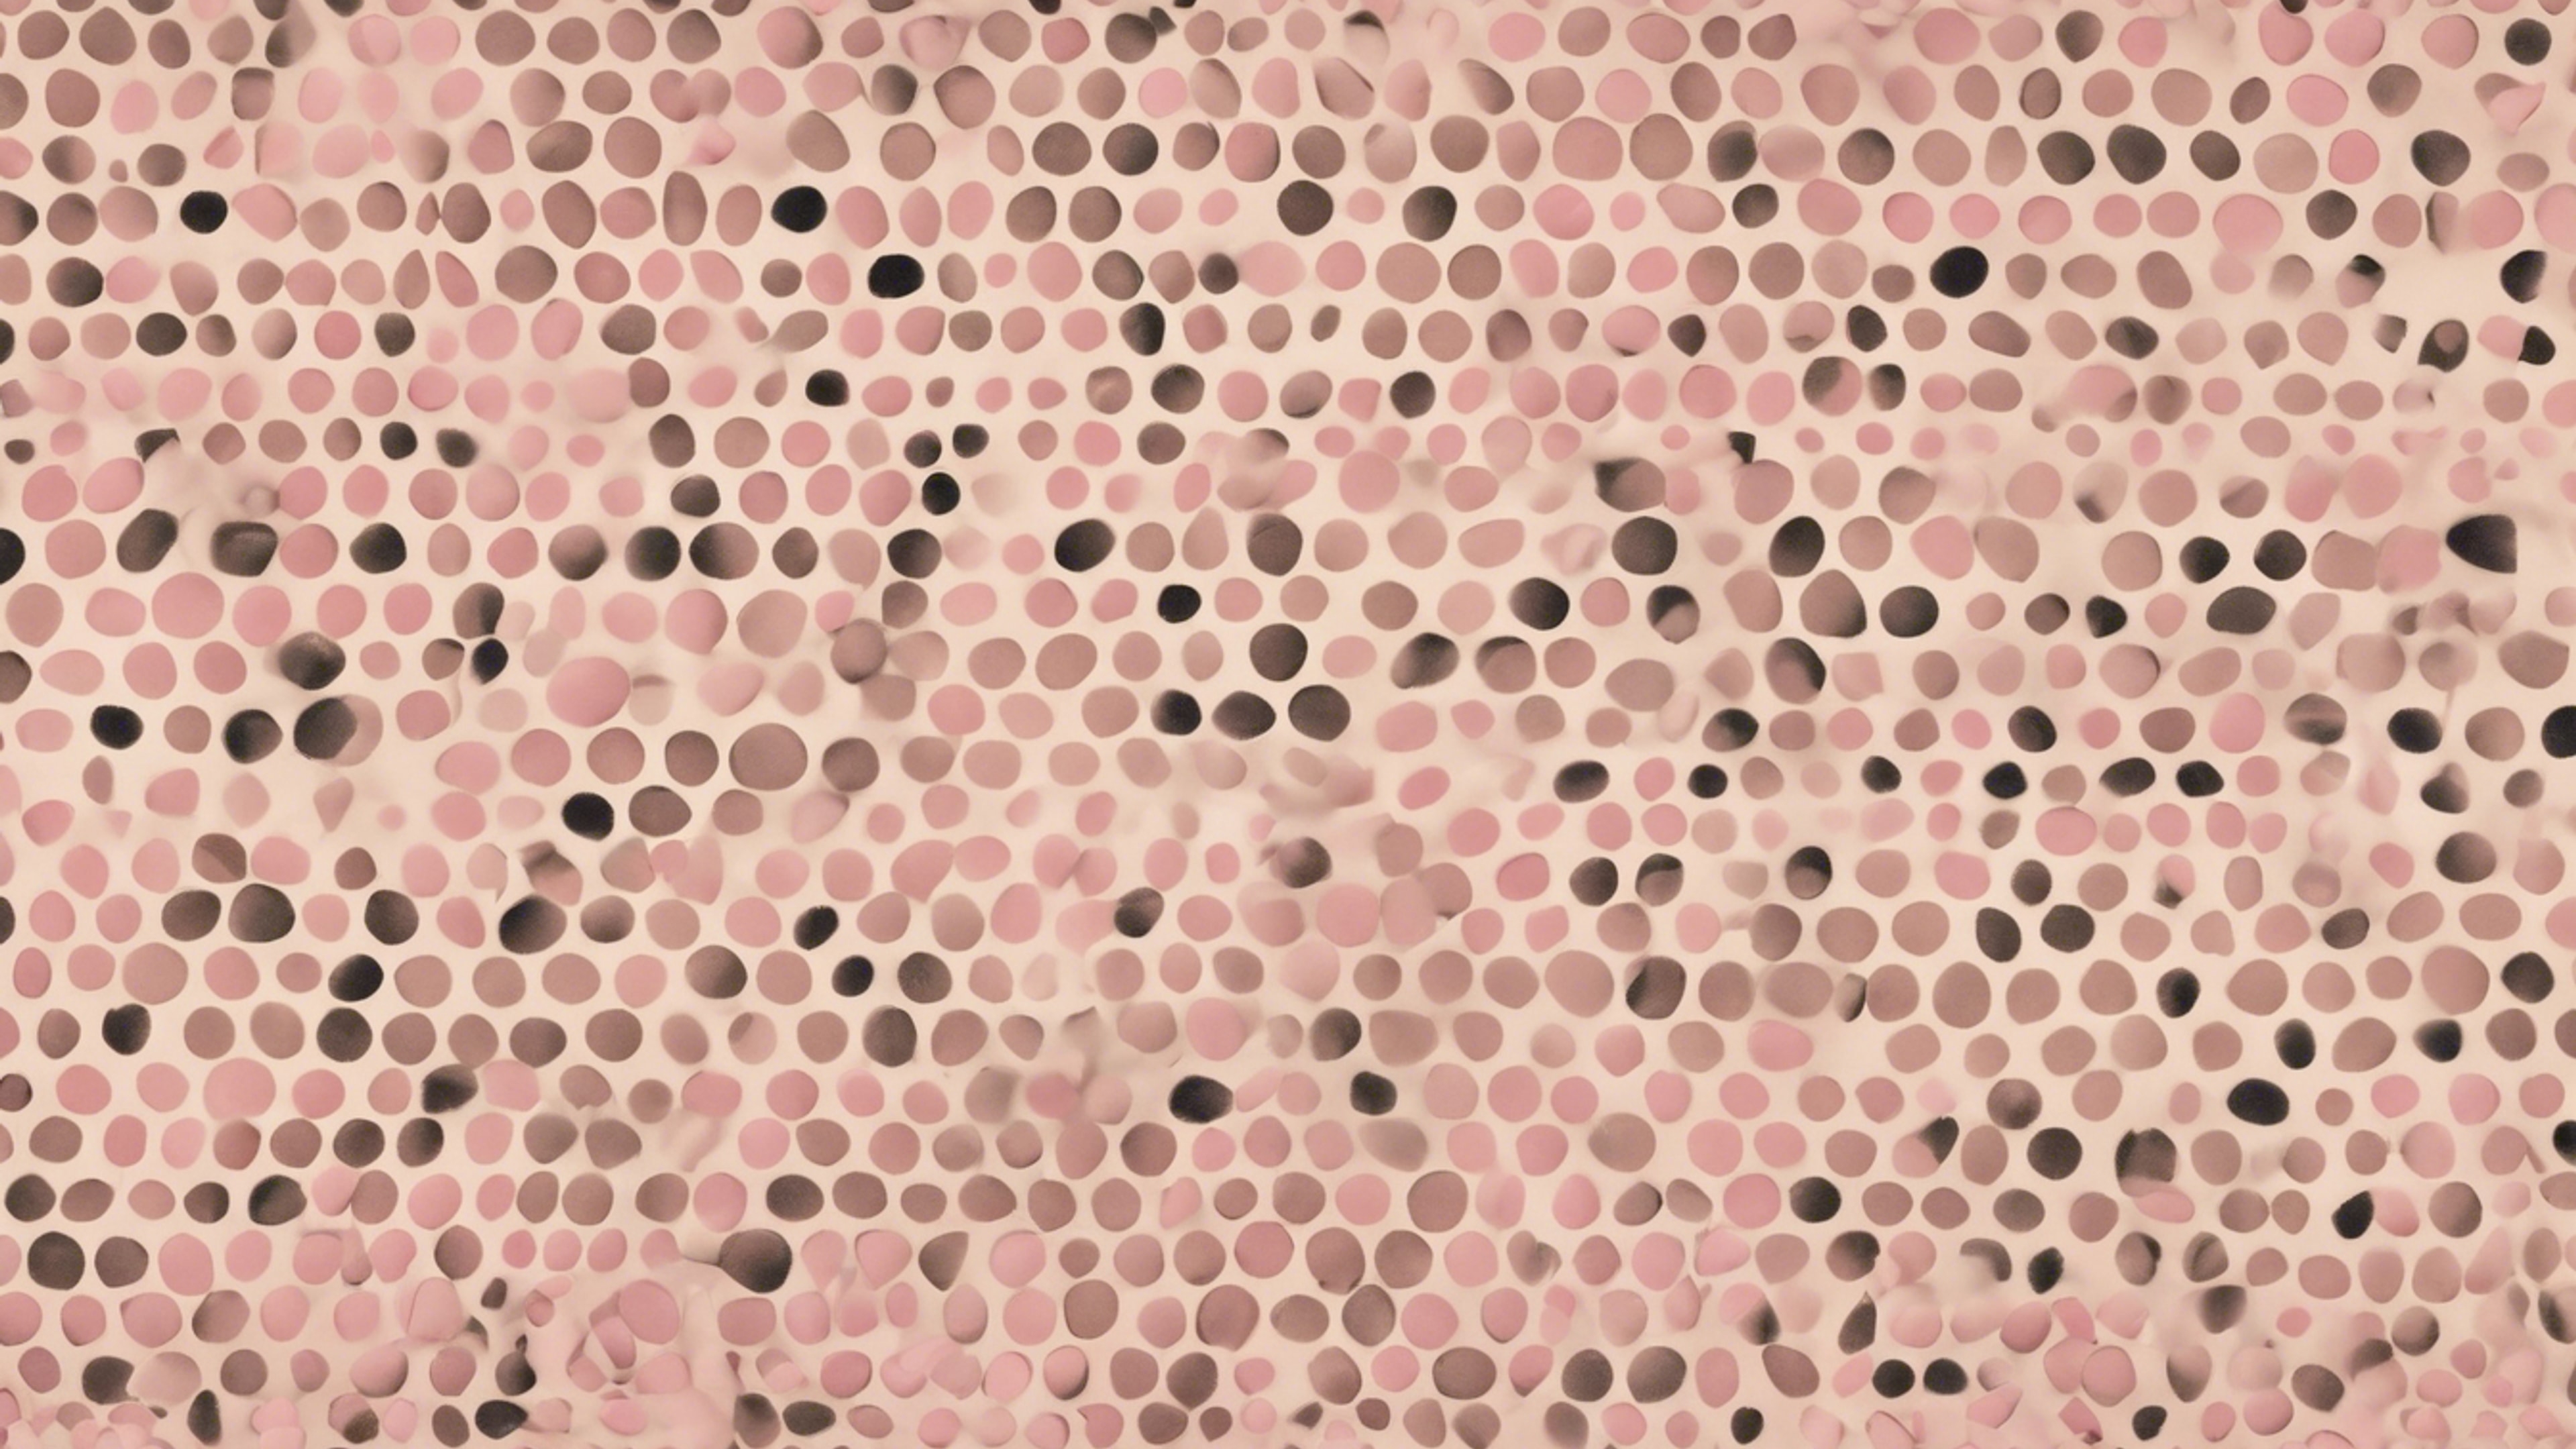 A polka dot pattern consisting of small, pastel pink dots on a cream background壁紙[ffe38e7b3ae543588364]